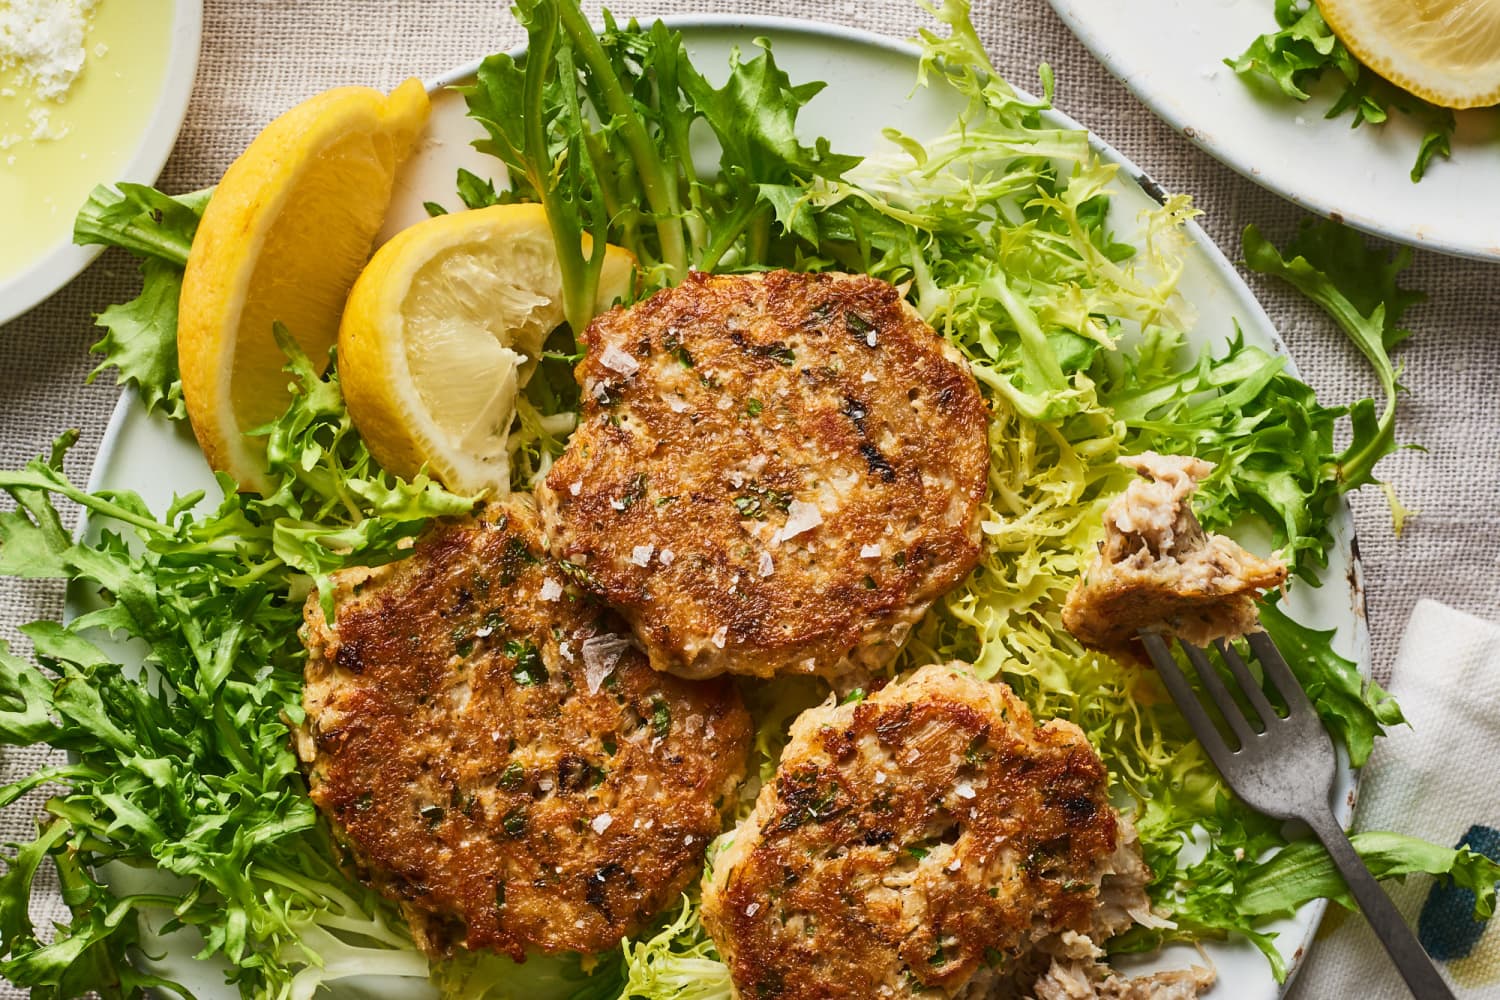 How To Make the Best Crab Cakes | The Kitchn